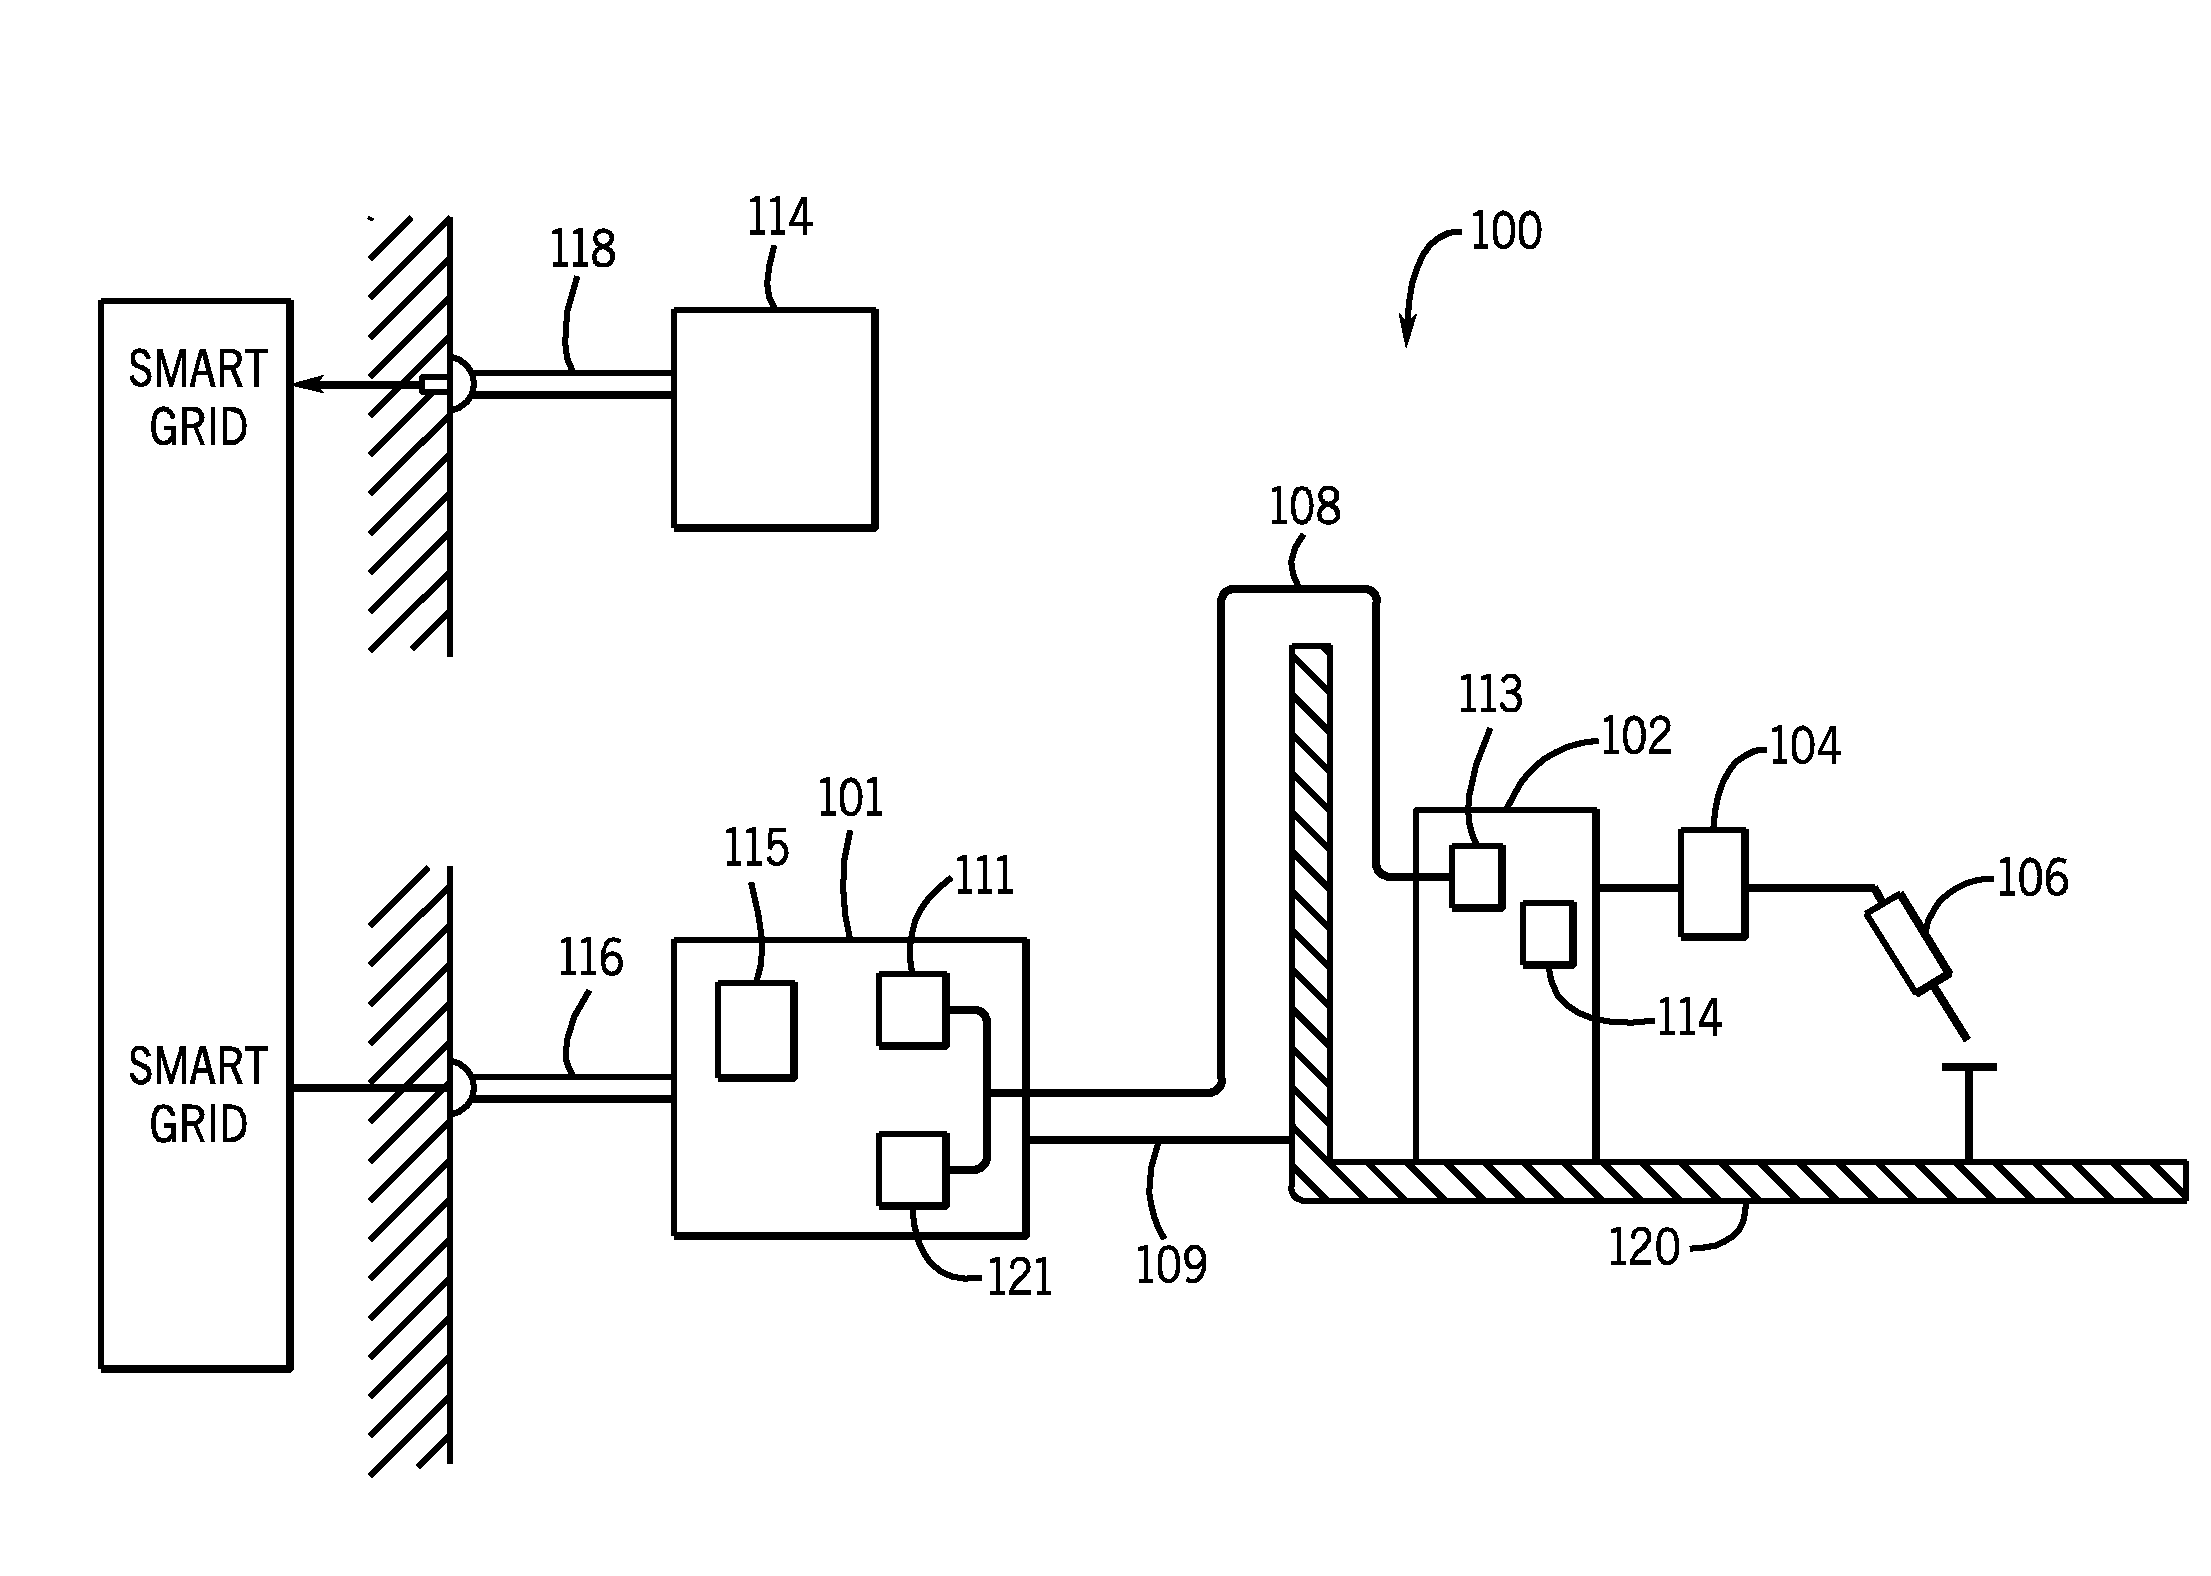 Weld Cell System With Communication